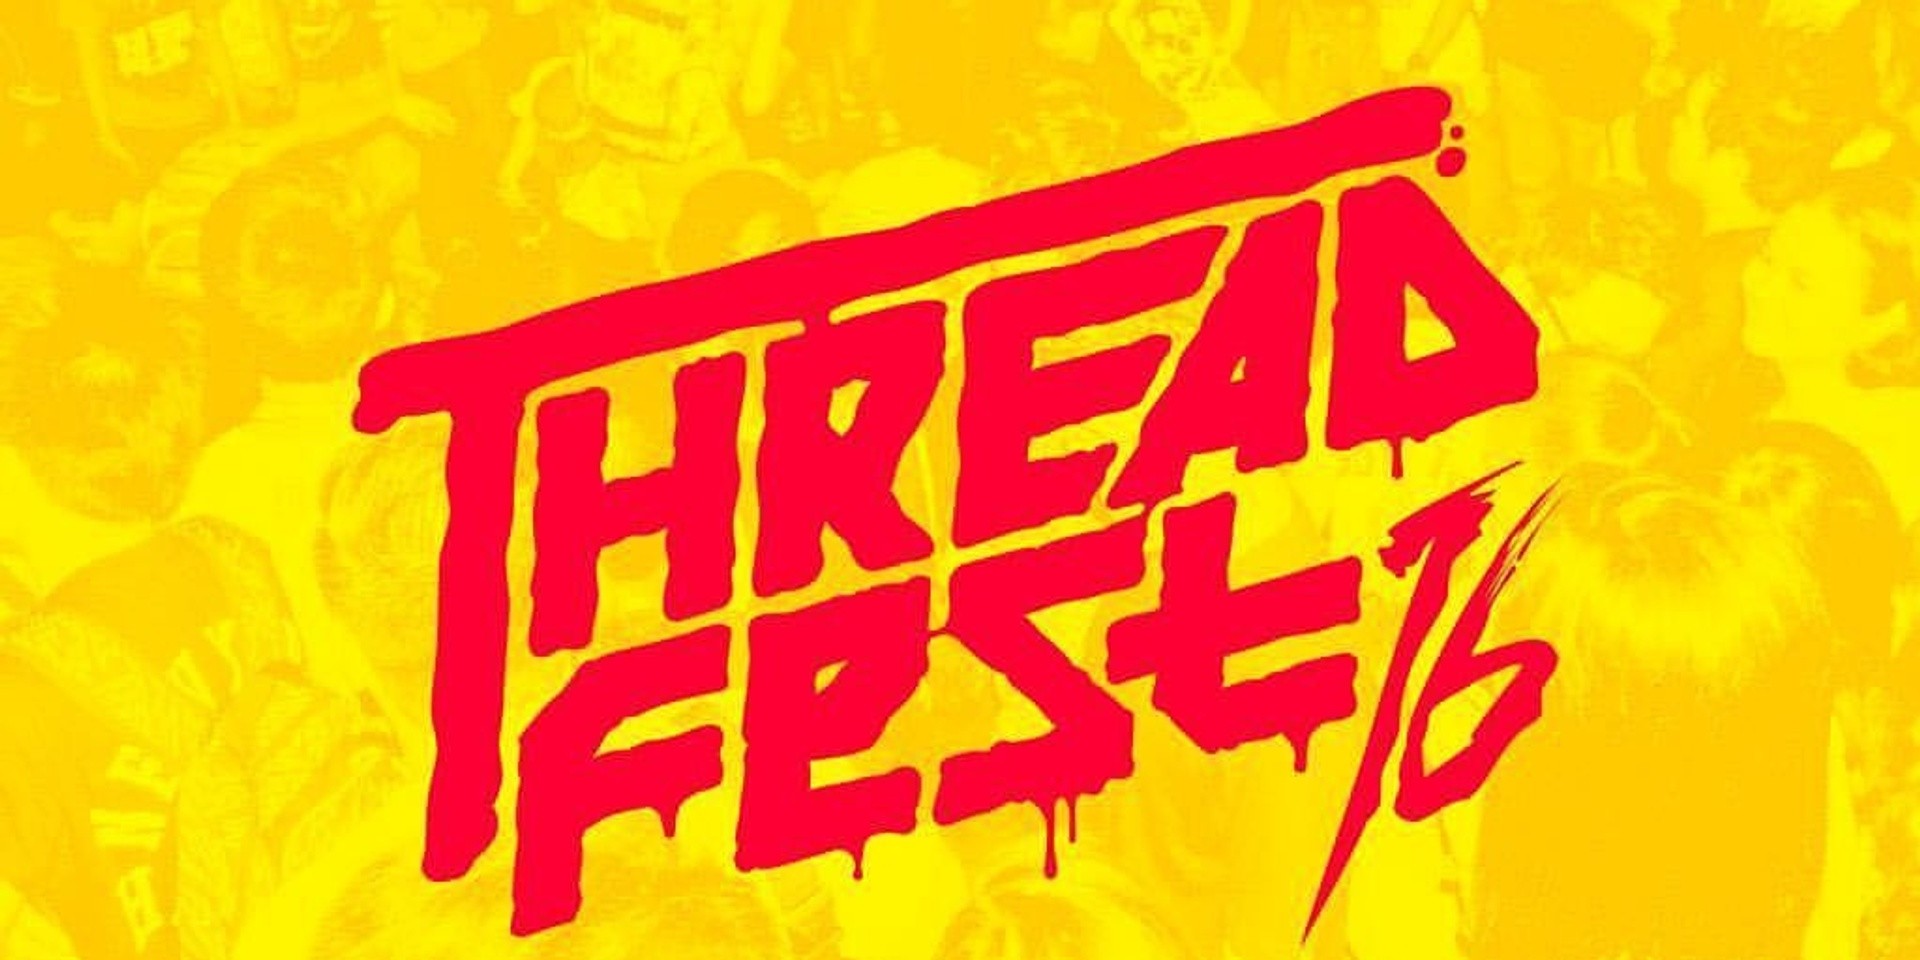 Threadfest brings art, music and independent music together in next month's festival